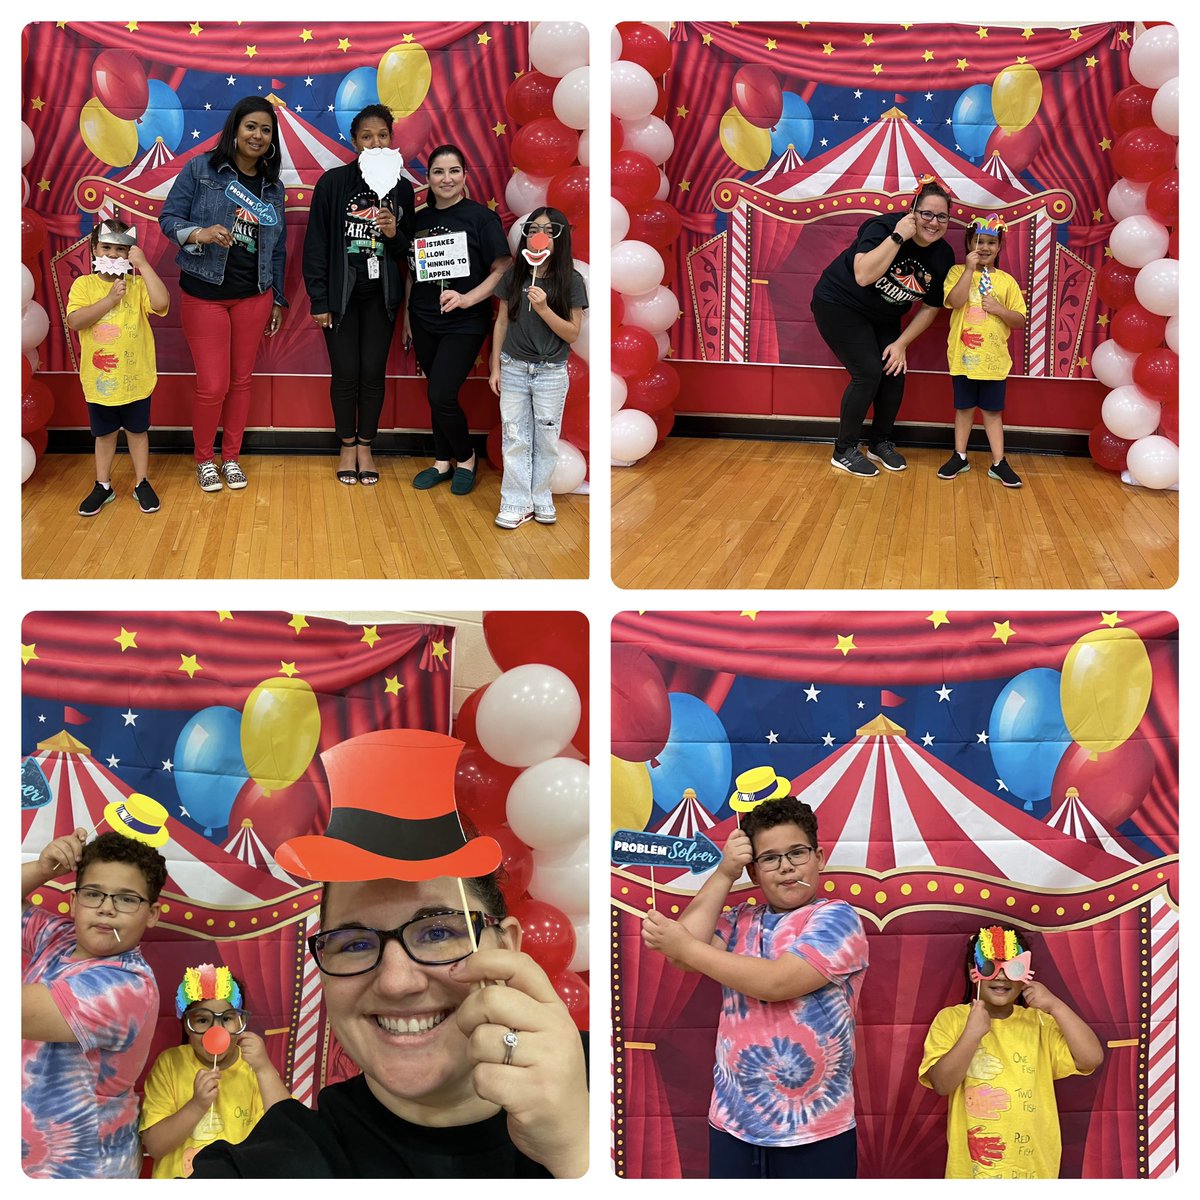 Having an AWESOME time at the Math Fact Fluency Fun Fair! The kids are having a fun playing all the fantastic math games! @CvisdT @ChannelviewISD @sandersrobin422 @alexwilk88 #choosechannelview #mathcarnival #mathisfun